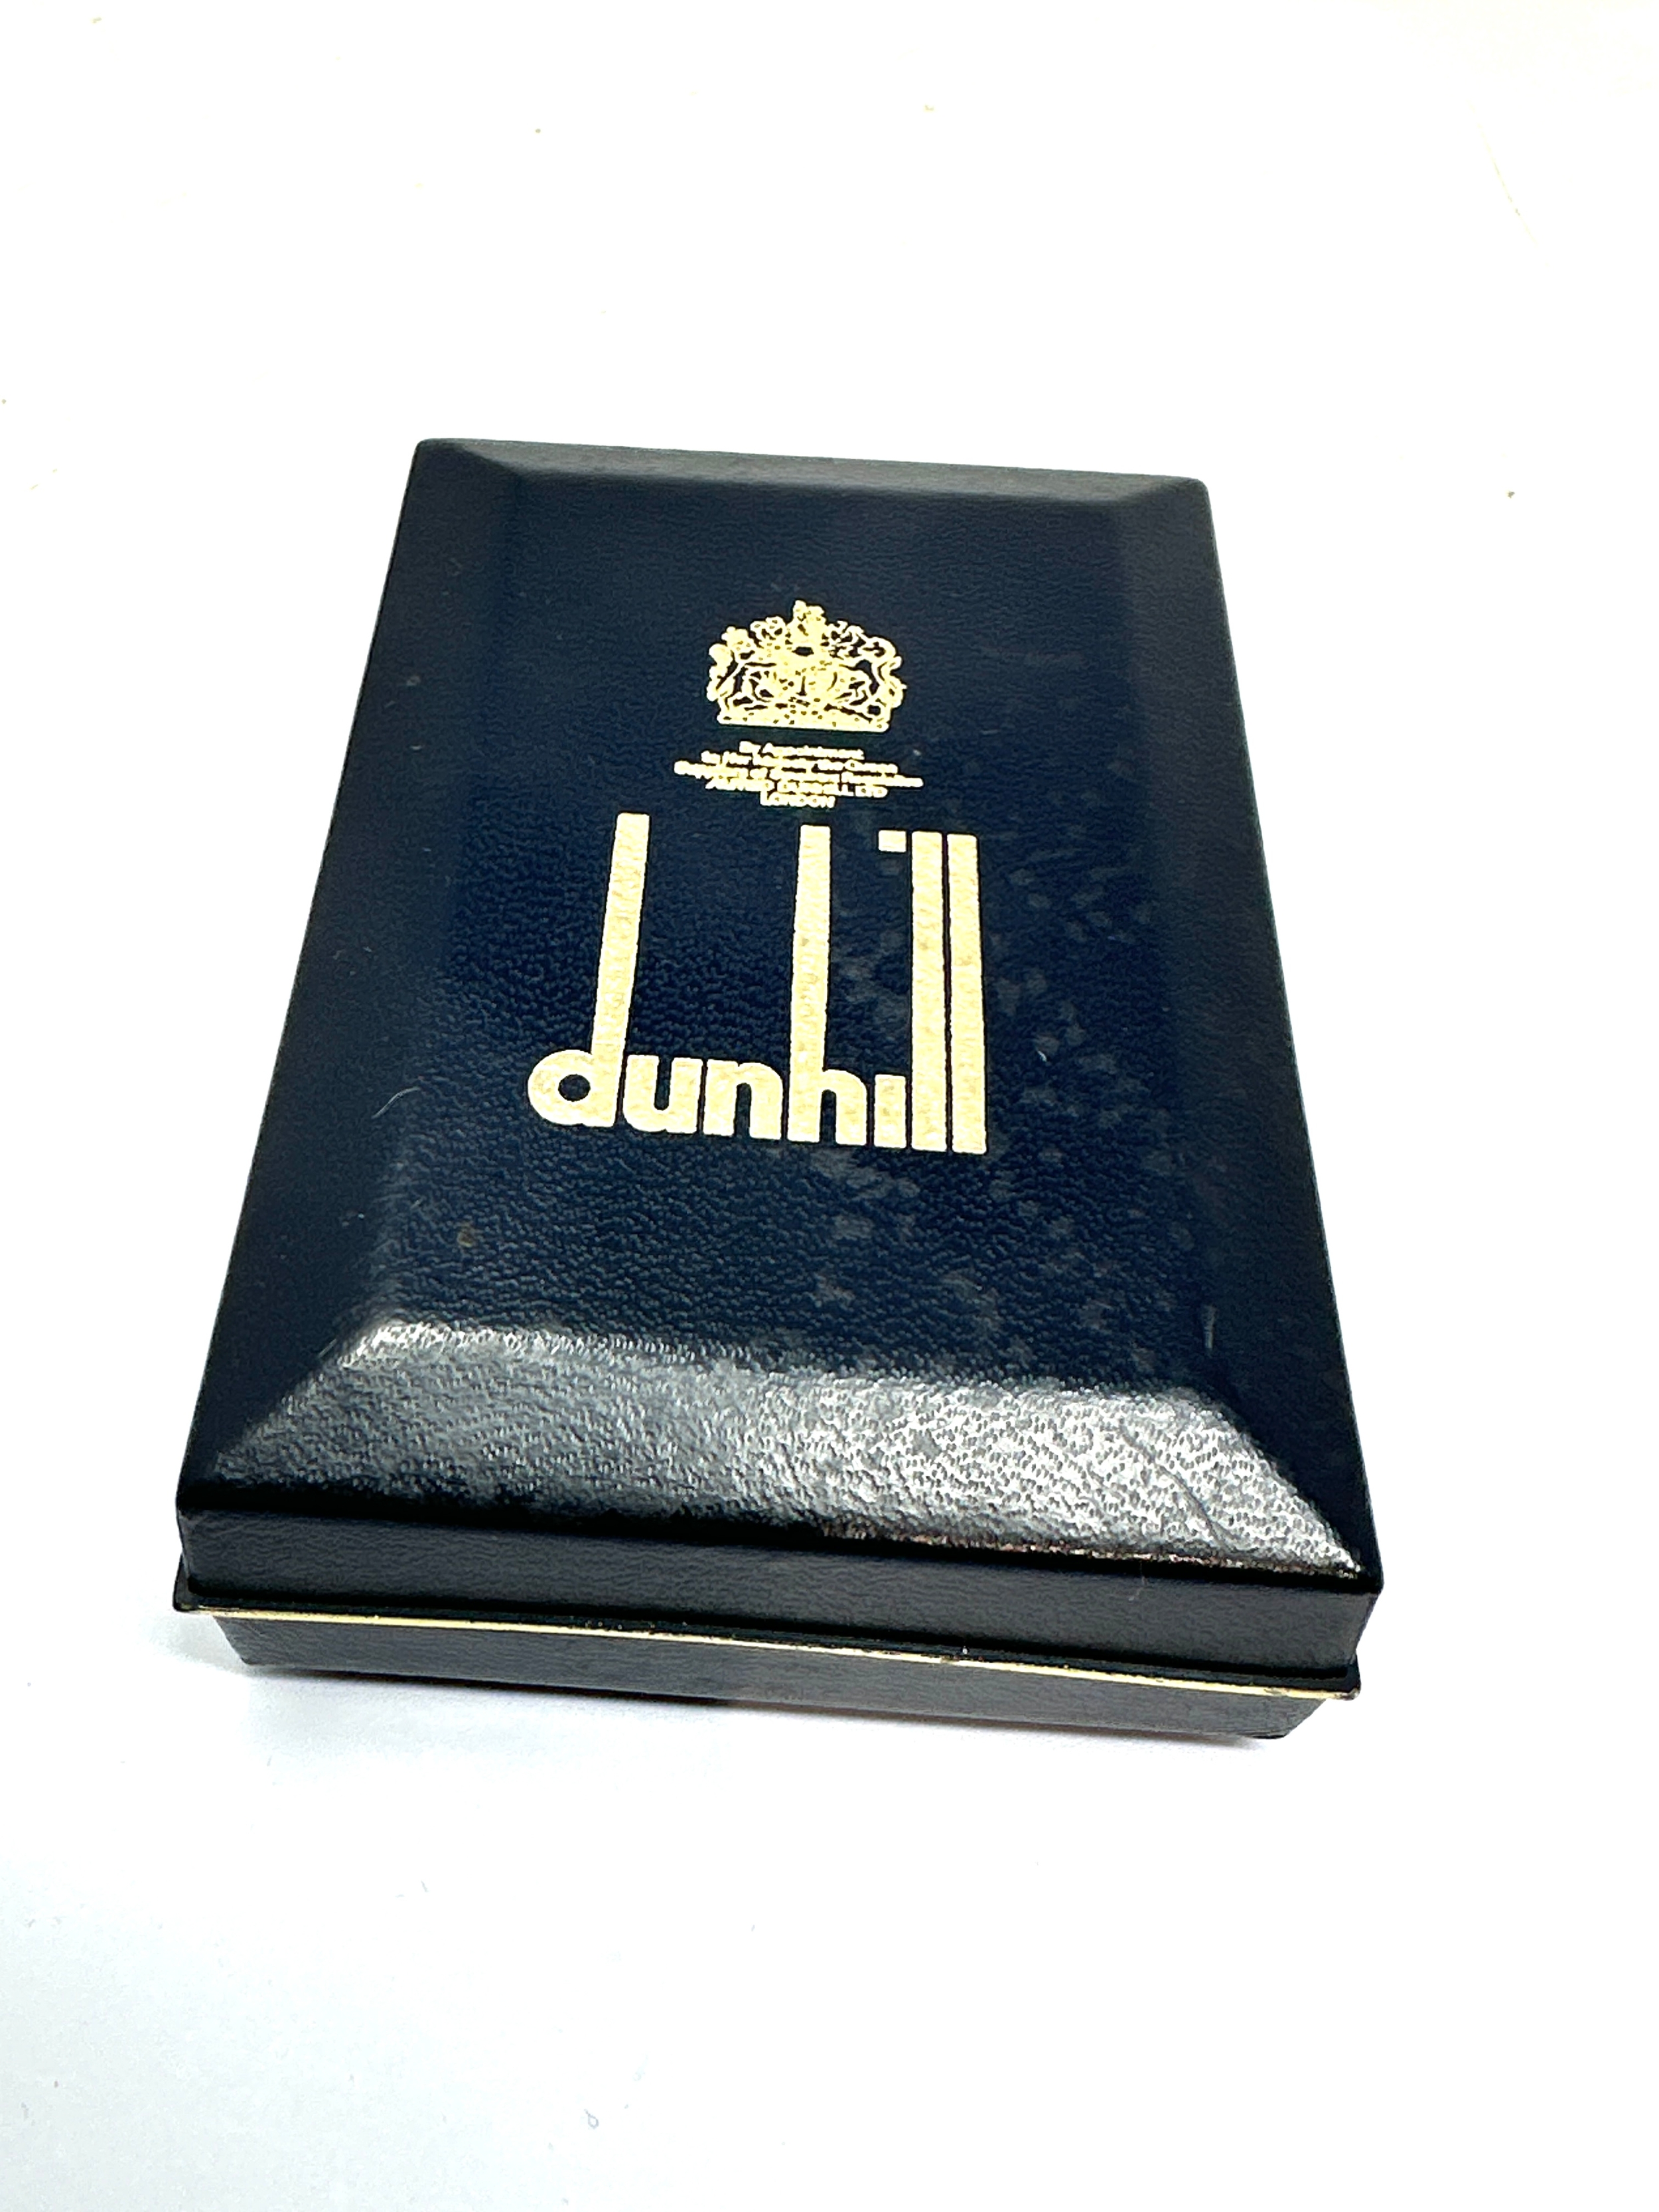 Vintage Boxed Dunhill cigarette lighter original boxed with booklet - Image 6 of 6